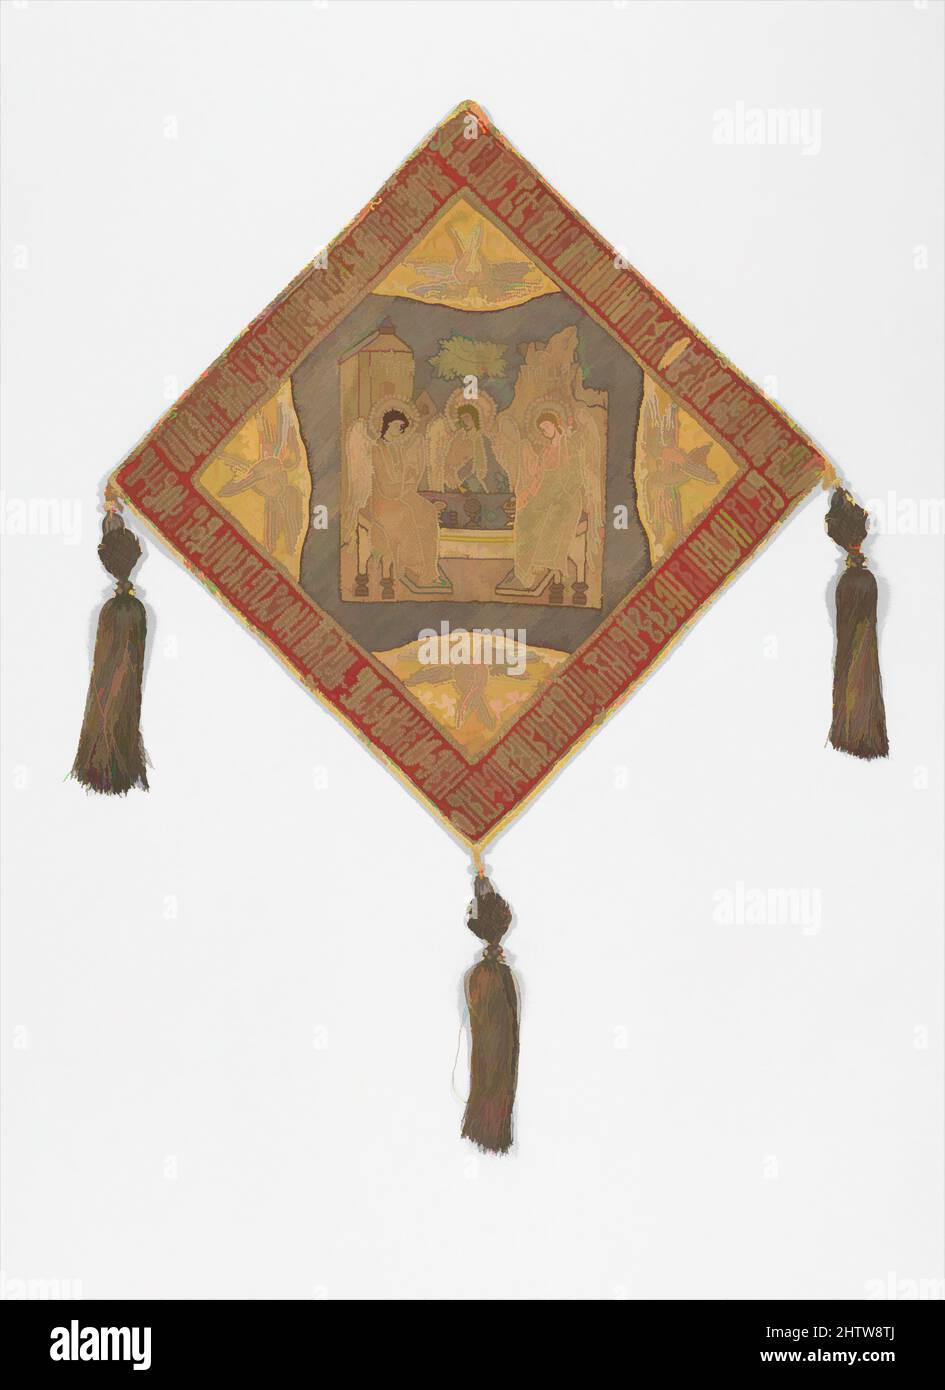 Art inspired by Epigonation (Palitsa), 16th–17th century, Russian, Silk, metal thread, and pearl embroidery on a foundation of silk satin; tassels of metal thread and pearls, 22 3/8 × 21 1/8 in. (56.8 × 53.7 cm), Textiles-Embroidered, Worn by a bishop over his right thigh, this, Classic works modernized by Artotop with a splash of modernity. Shapes, color and value, eye-catching visual impact on art. Emotions through freedom of artworks in a contemporary way. A timeless message pursuing a wildly creative new direction. Artists turning to the digital medium and creating the Artotop NFT Stock Photo